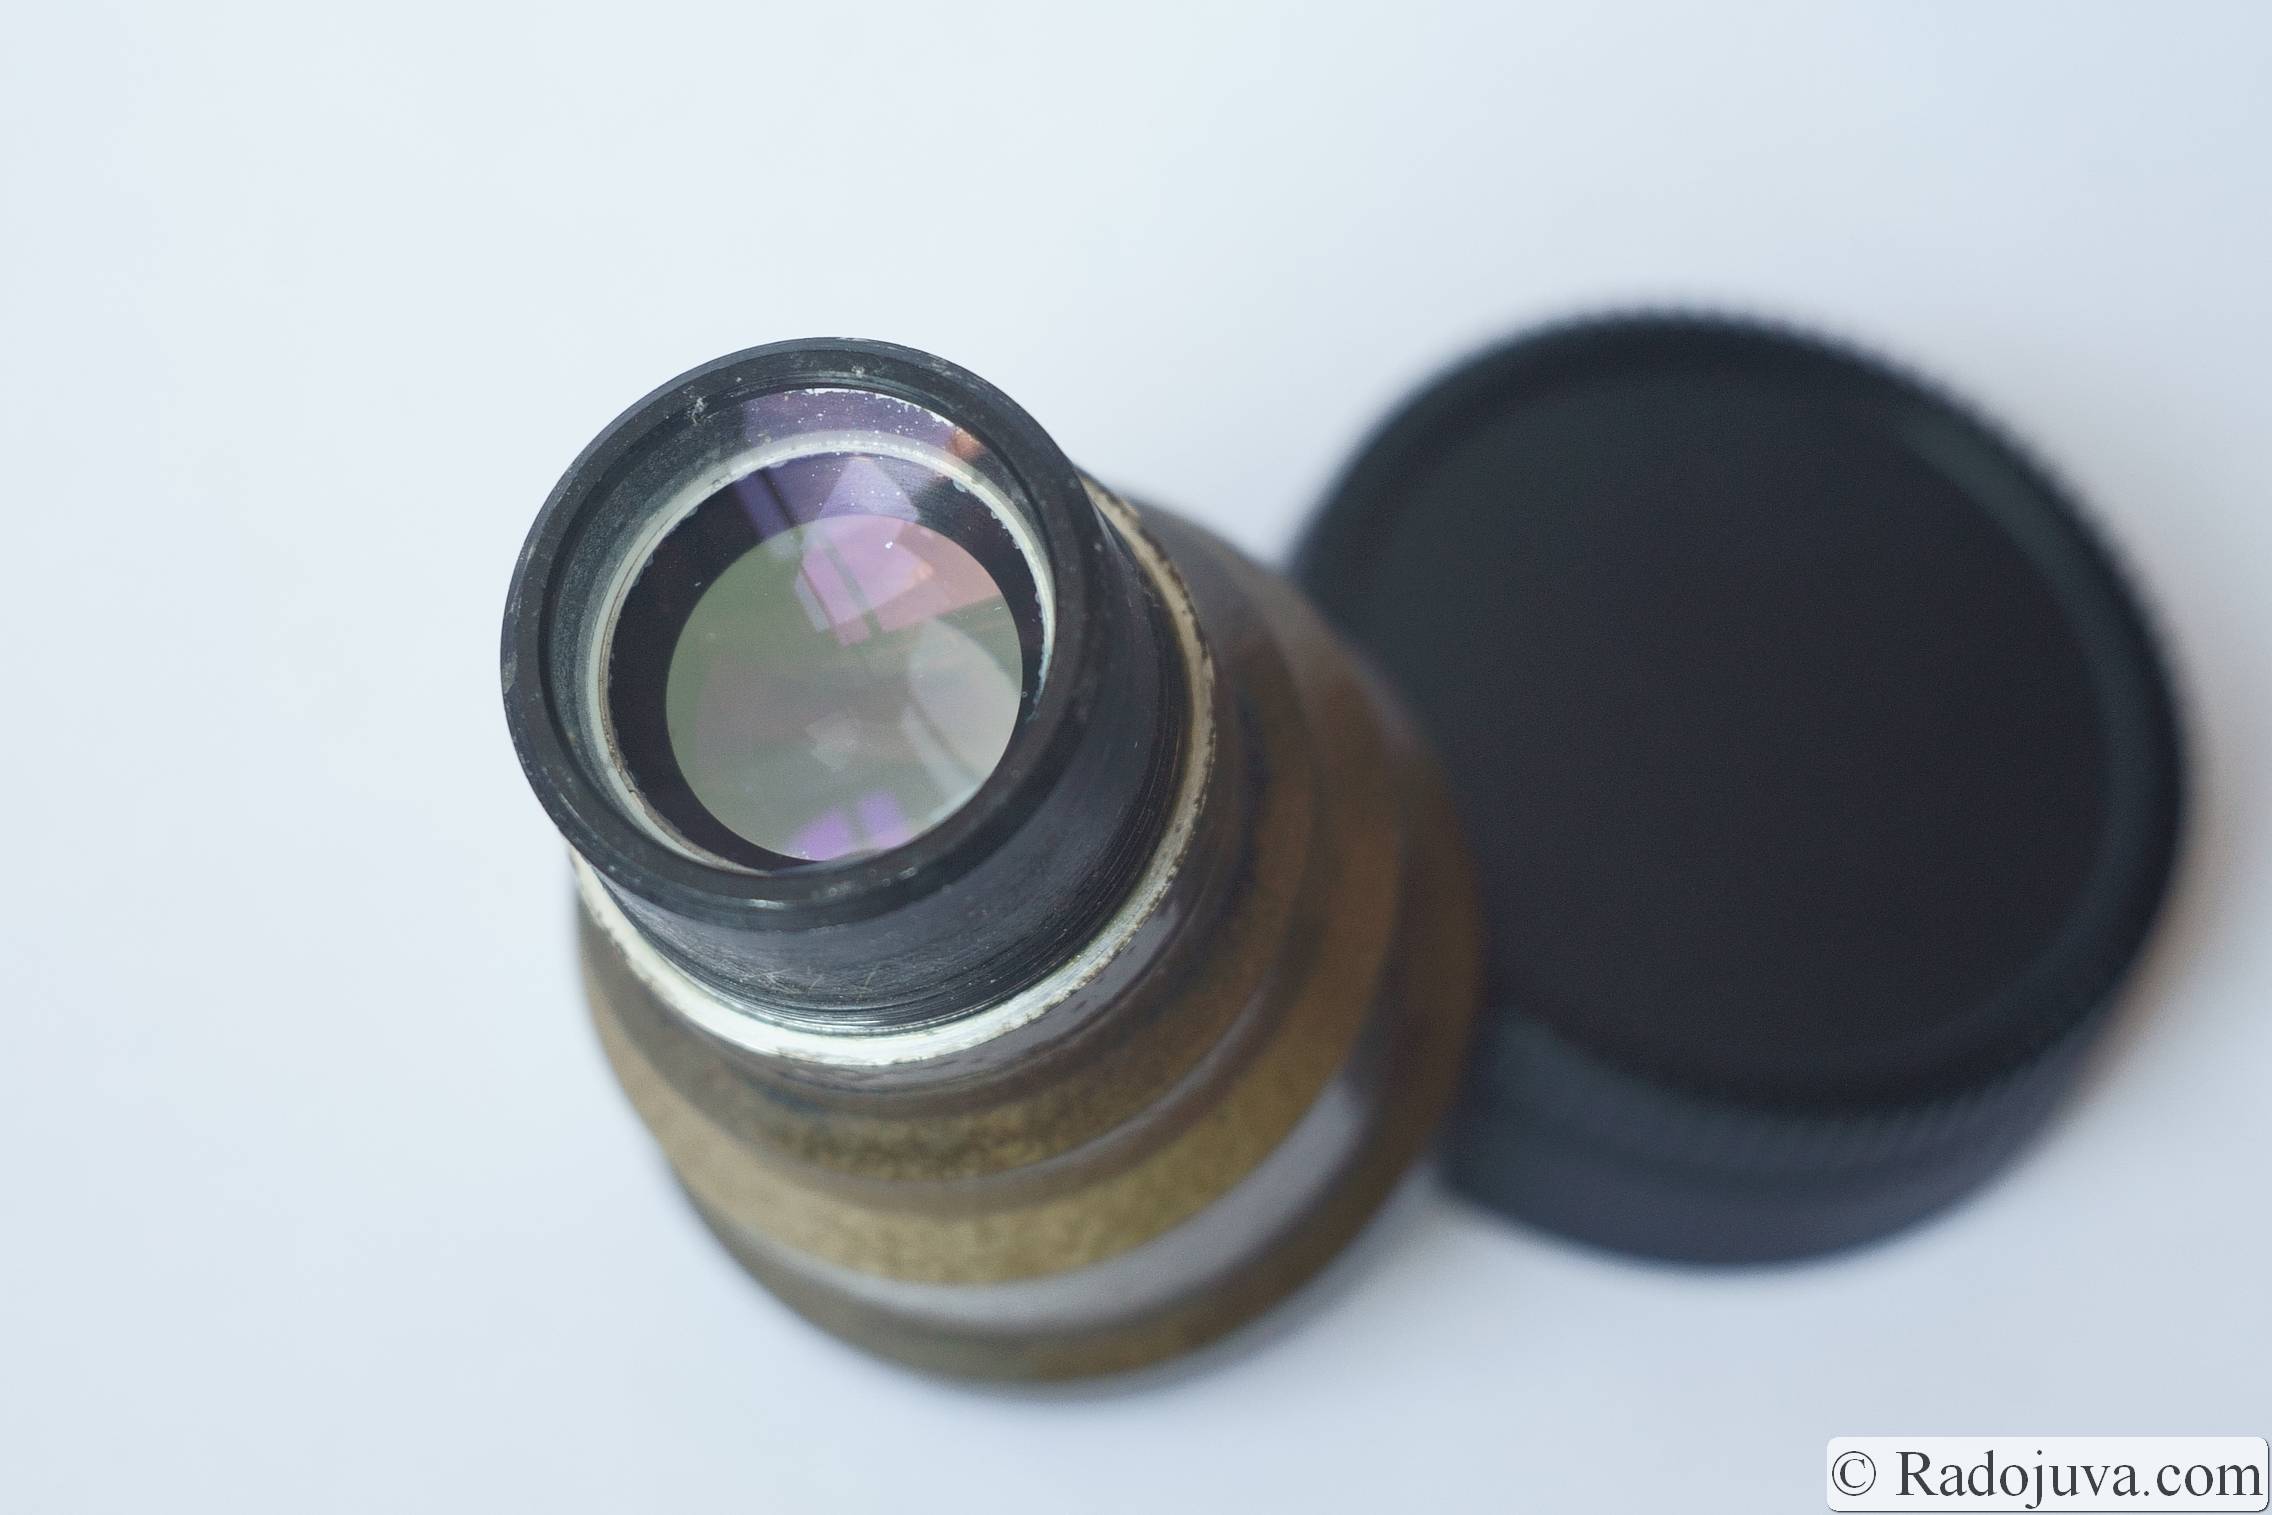 The back of an unadapted lens block. The frame of the rear lens should be as sharp as possible for adaptation.